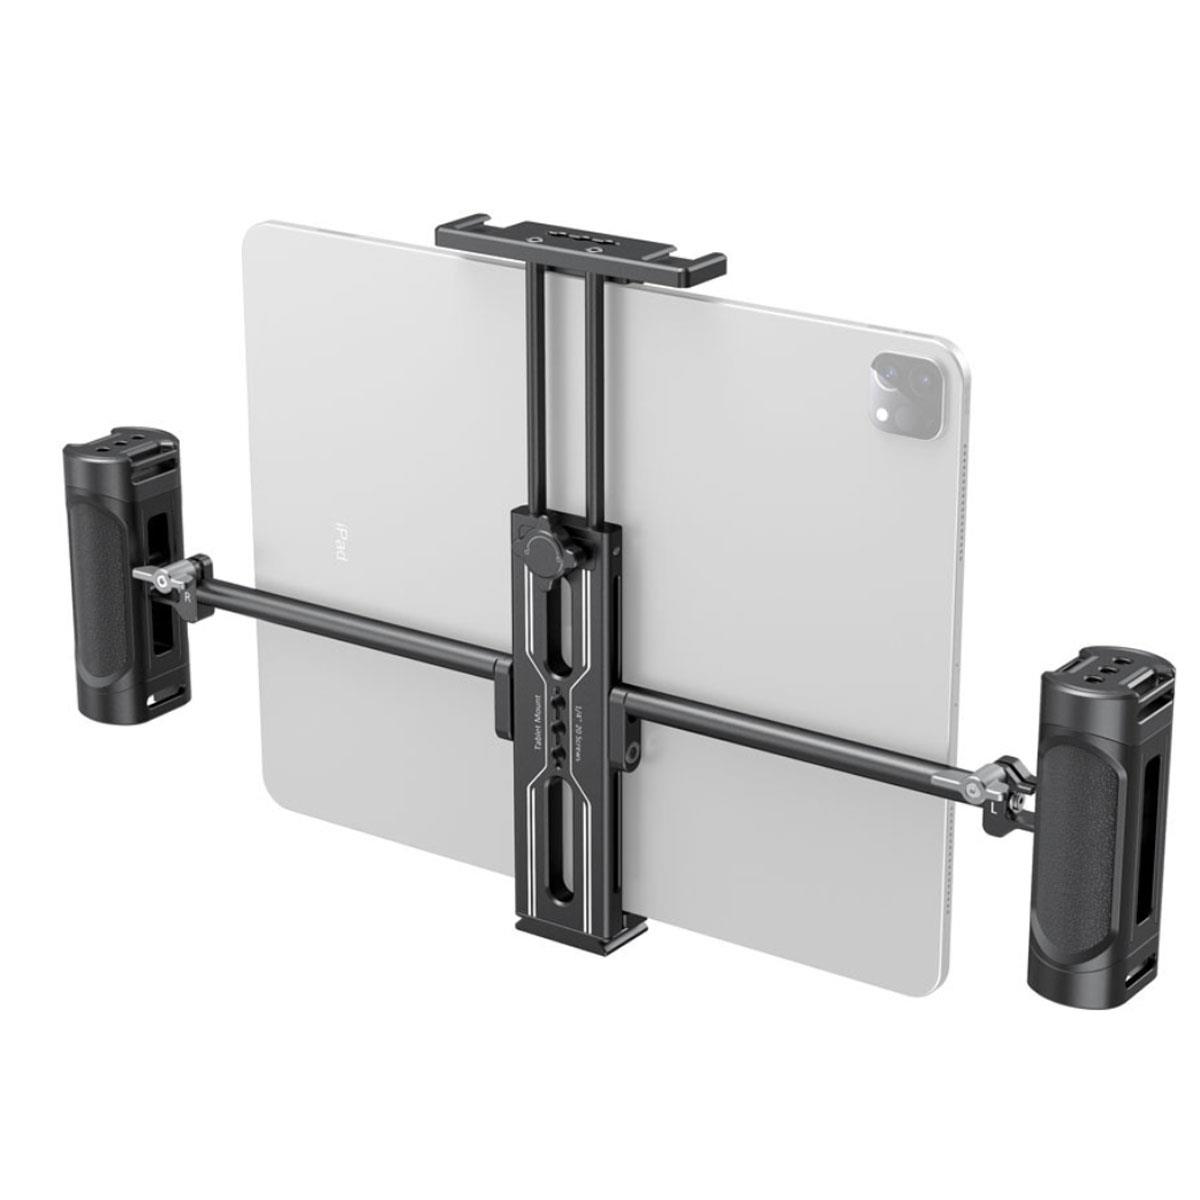 Image of SmallRig 2929B Tablet Mount with Dual Handgrip for iPad/Tablet